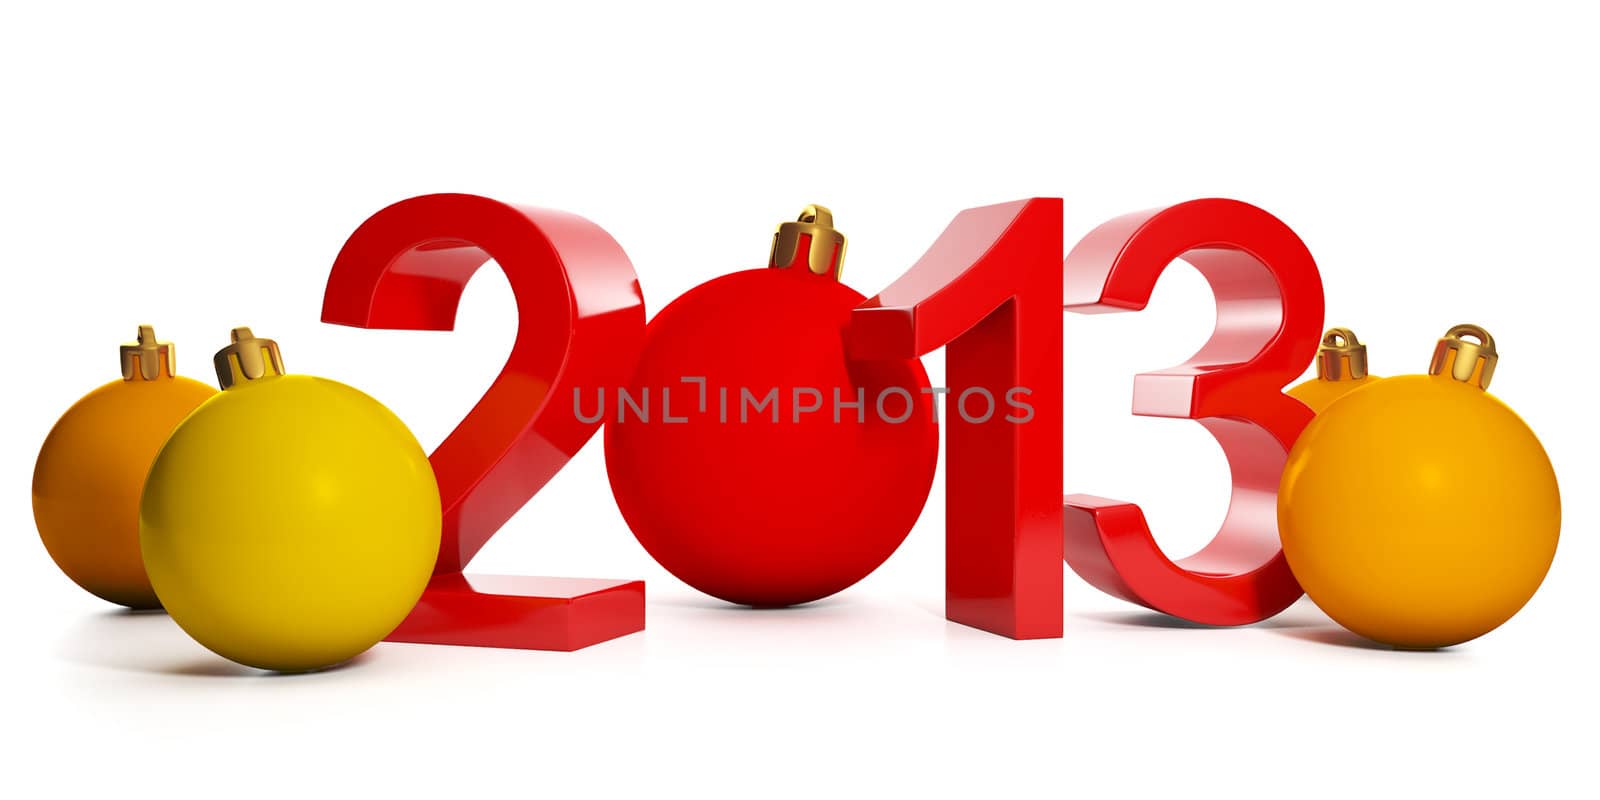 3d illustration: New Year and Christmas. In 2013 and a group of  by kolobsek